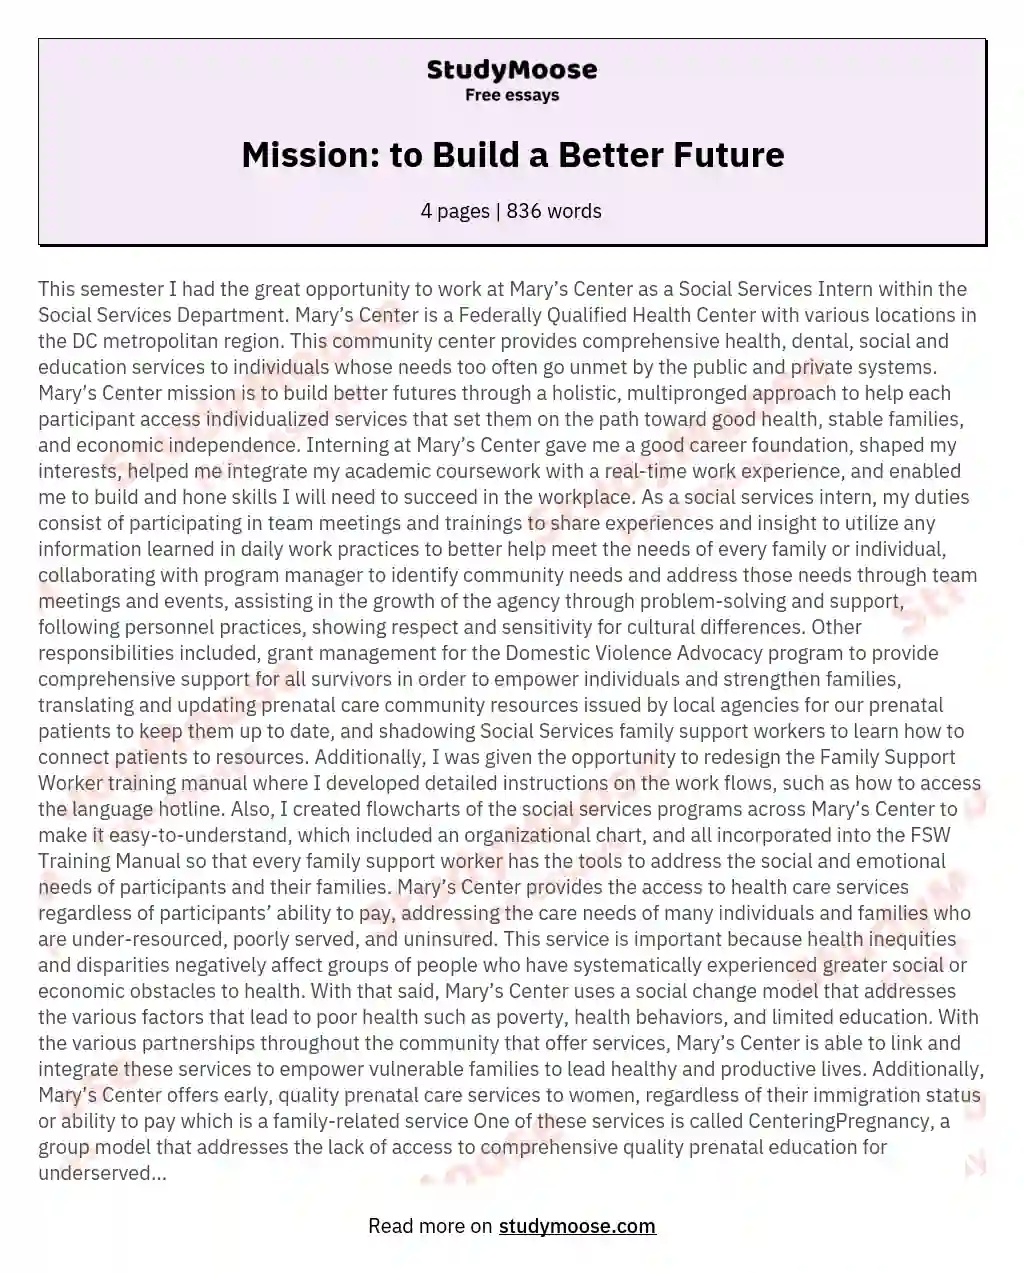 Mission: to Build a Better Future essay